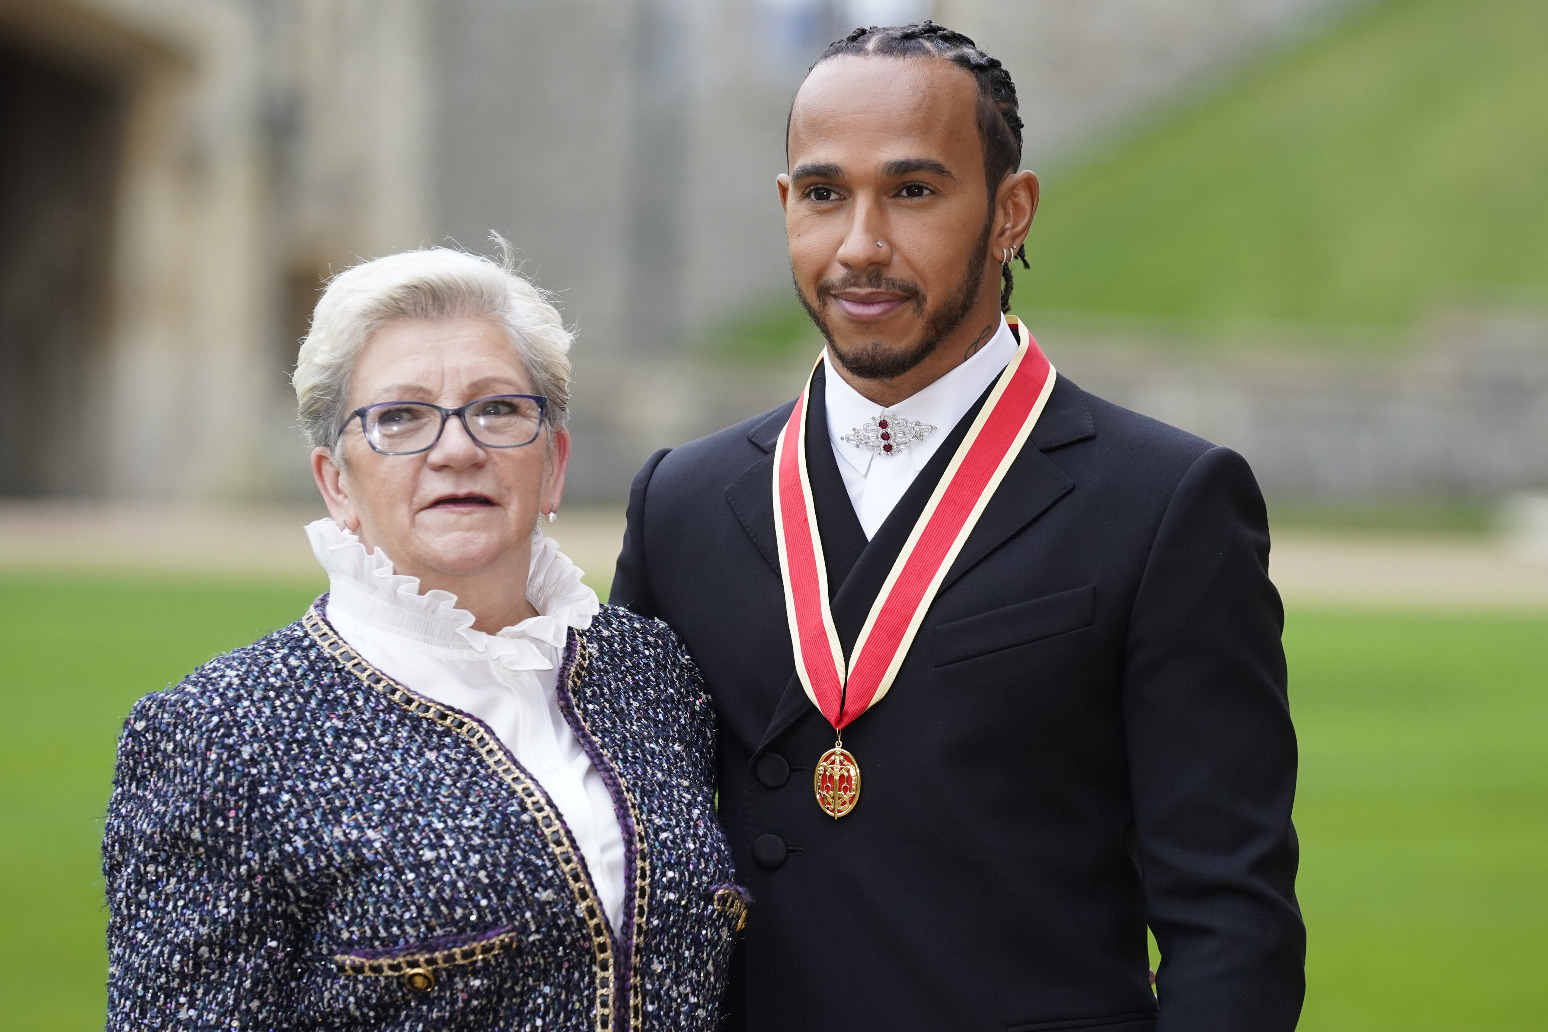 Lewis Hamilton to add mother’s surname as additional middle name 